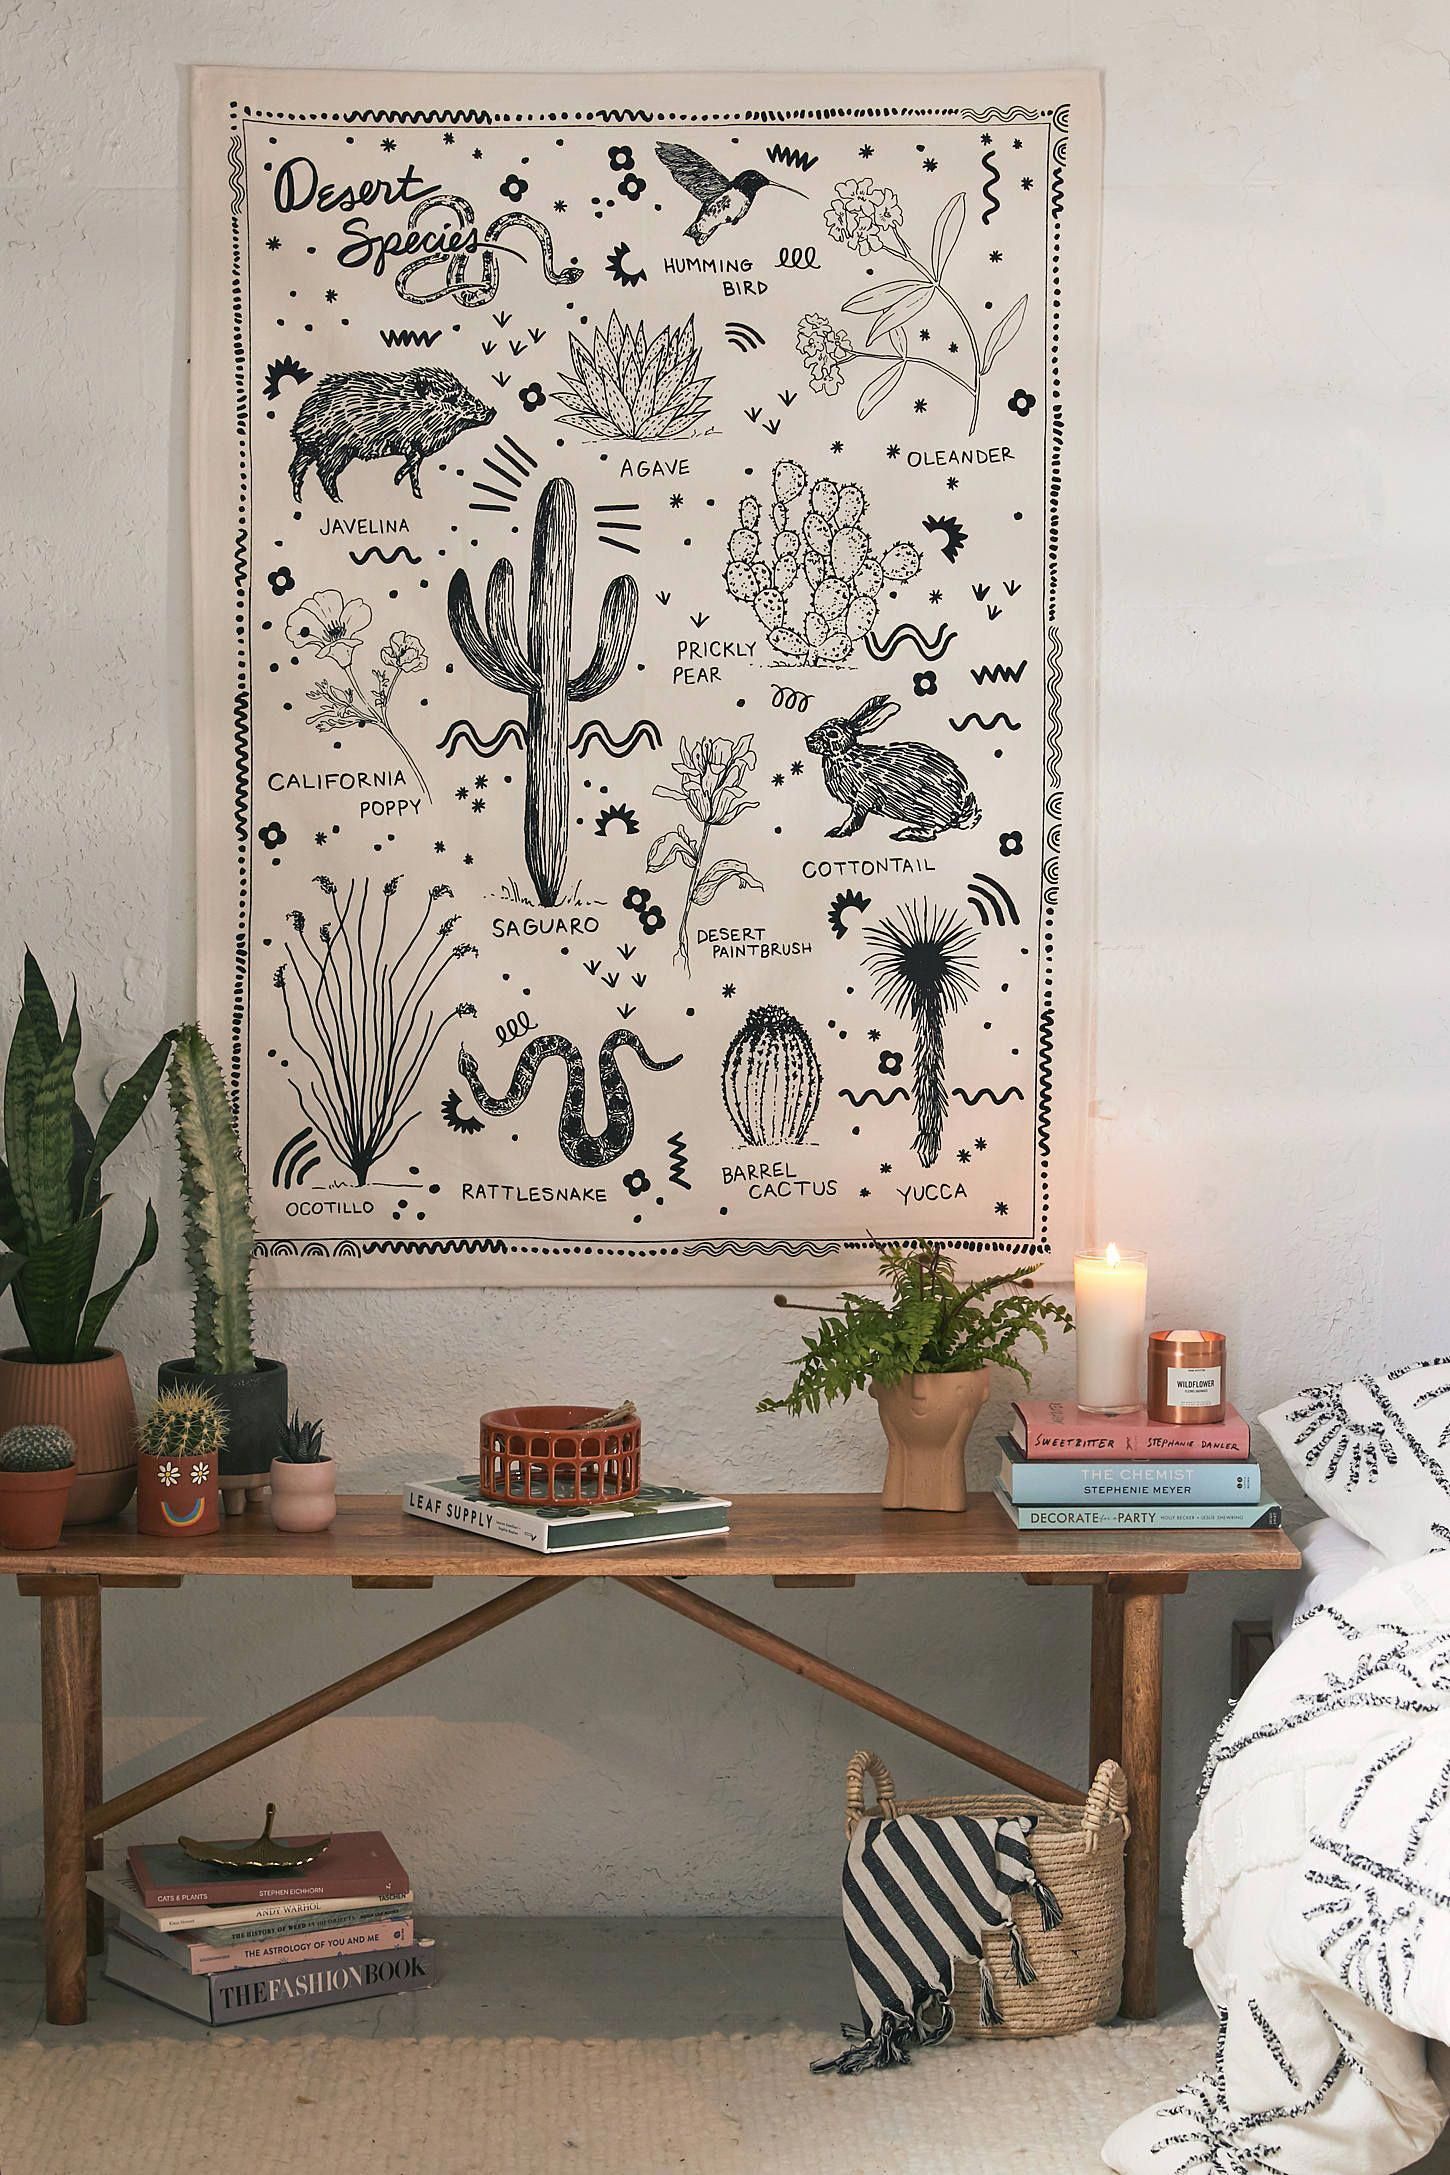 Desert Species Reference Chart Tapestry -   13 room decor College floors ideas